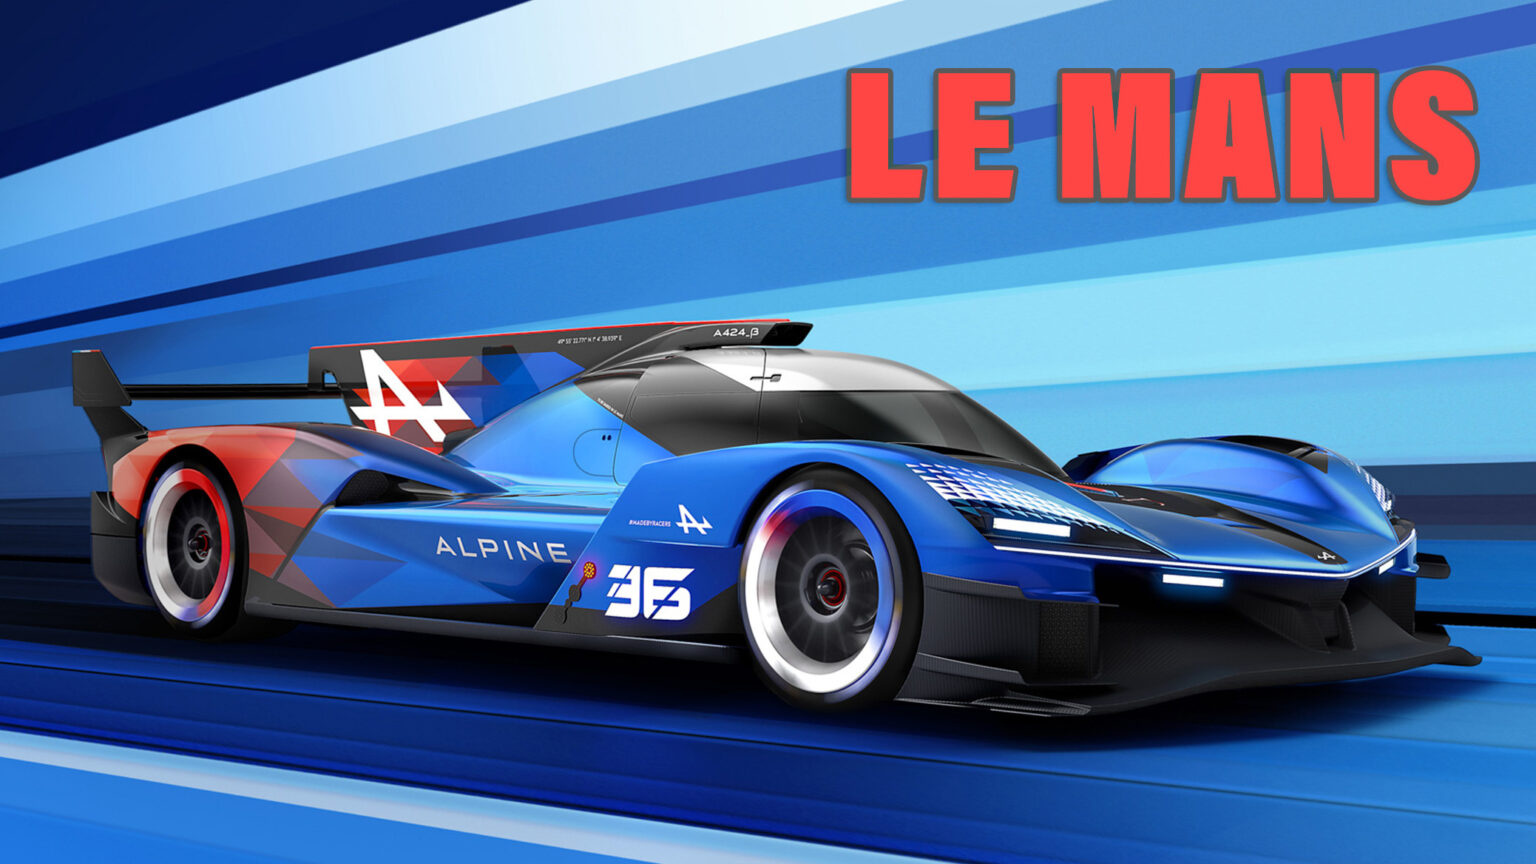 671HP Alpine A424_β Hypercar Is On Track For Le Mans 2024 Carscoops